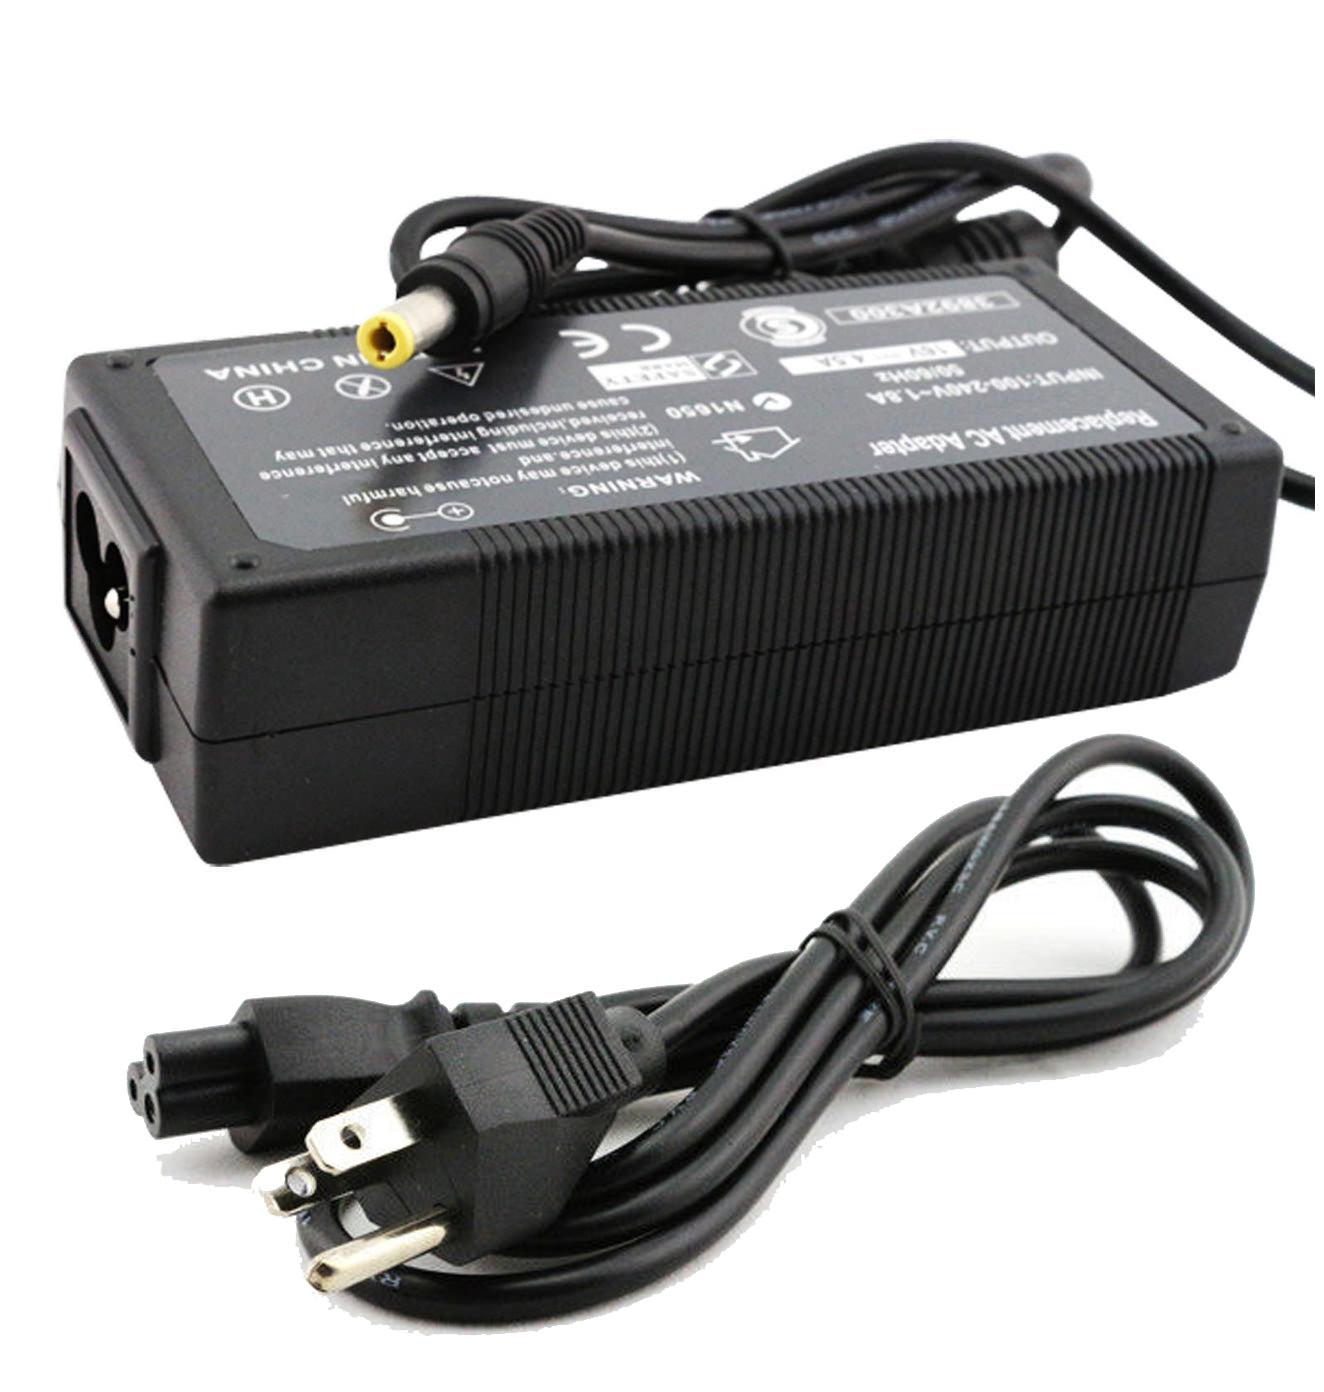 AC Adapter Charger for Panasonic Toughbook CF-54 Notebook.